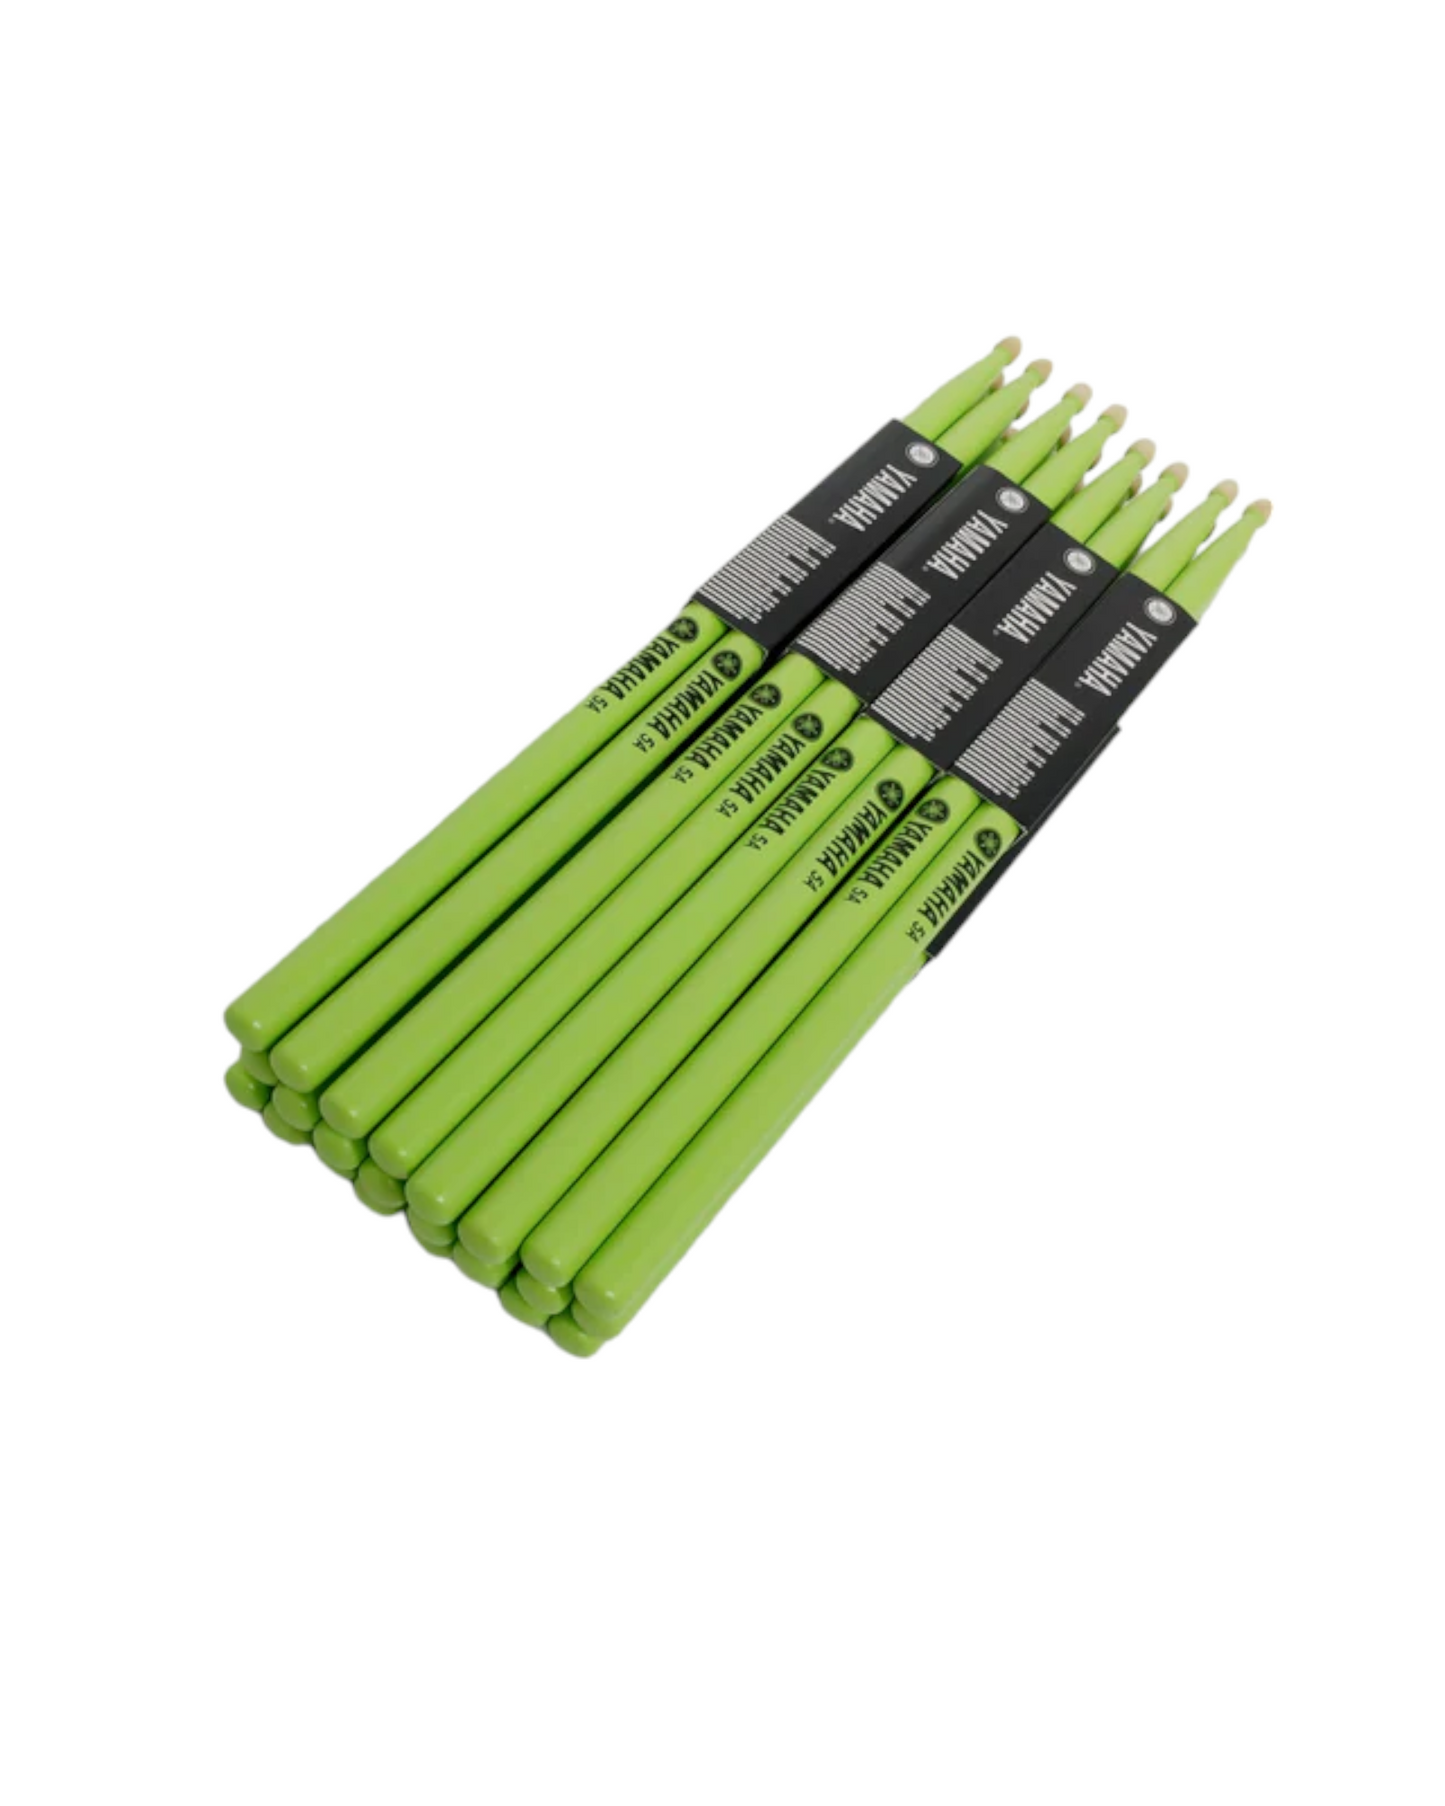 Yamaha YA5A Professional 5A Drum Sticks Maple 5 Color: Black, Green, Orange, Red, and Natural